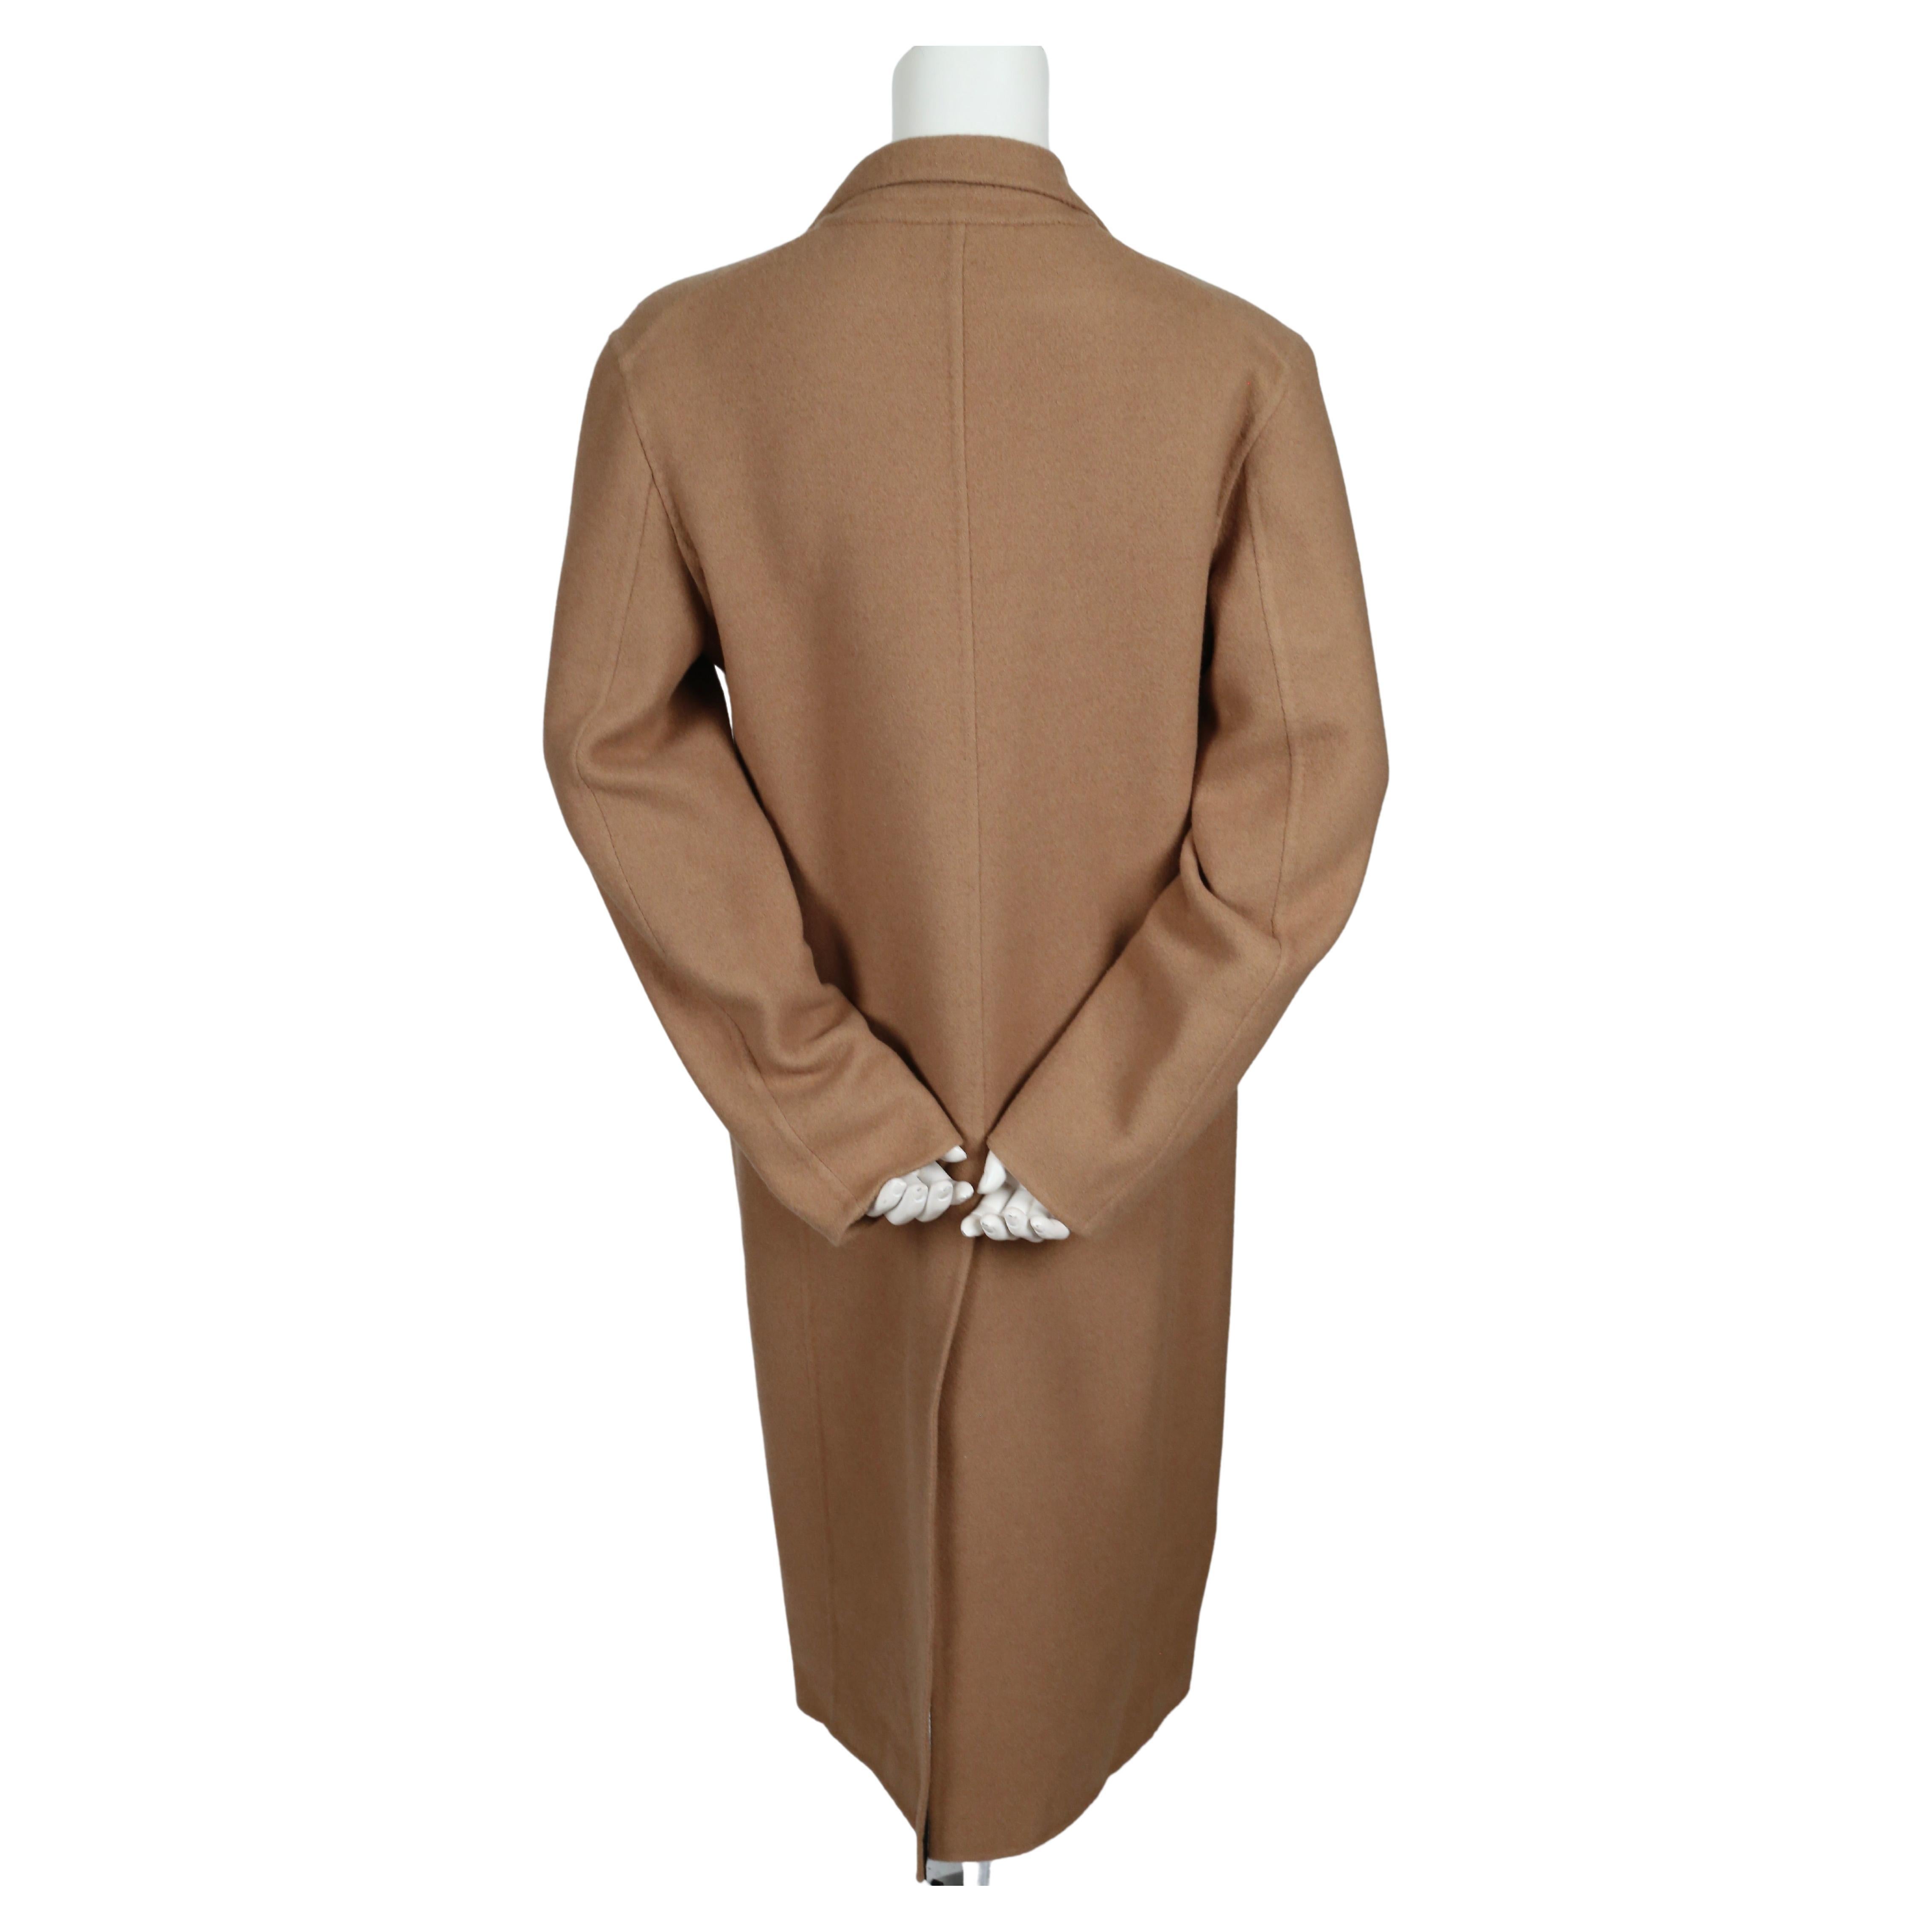 Celine by Phoebe Philo camel cashmere coat with belt   For Sale 1